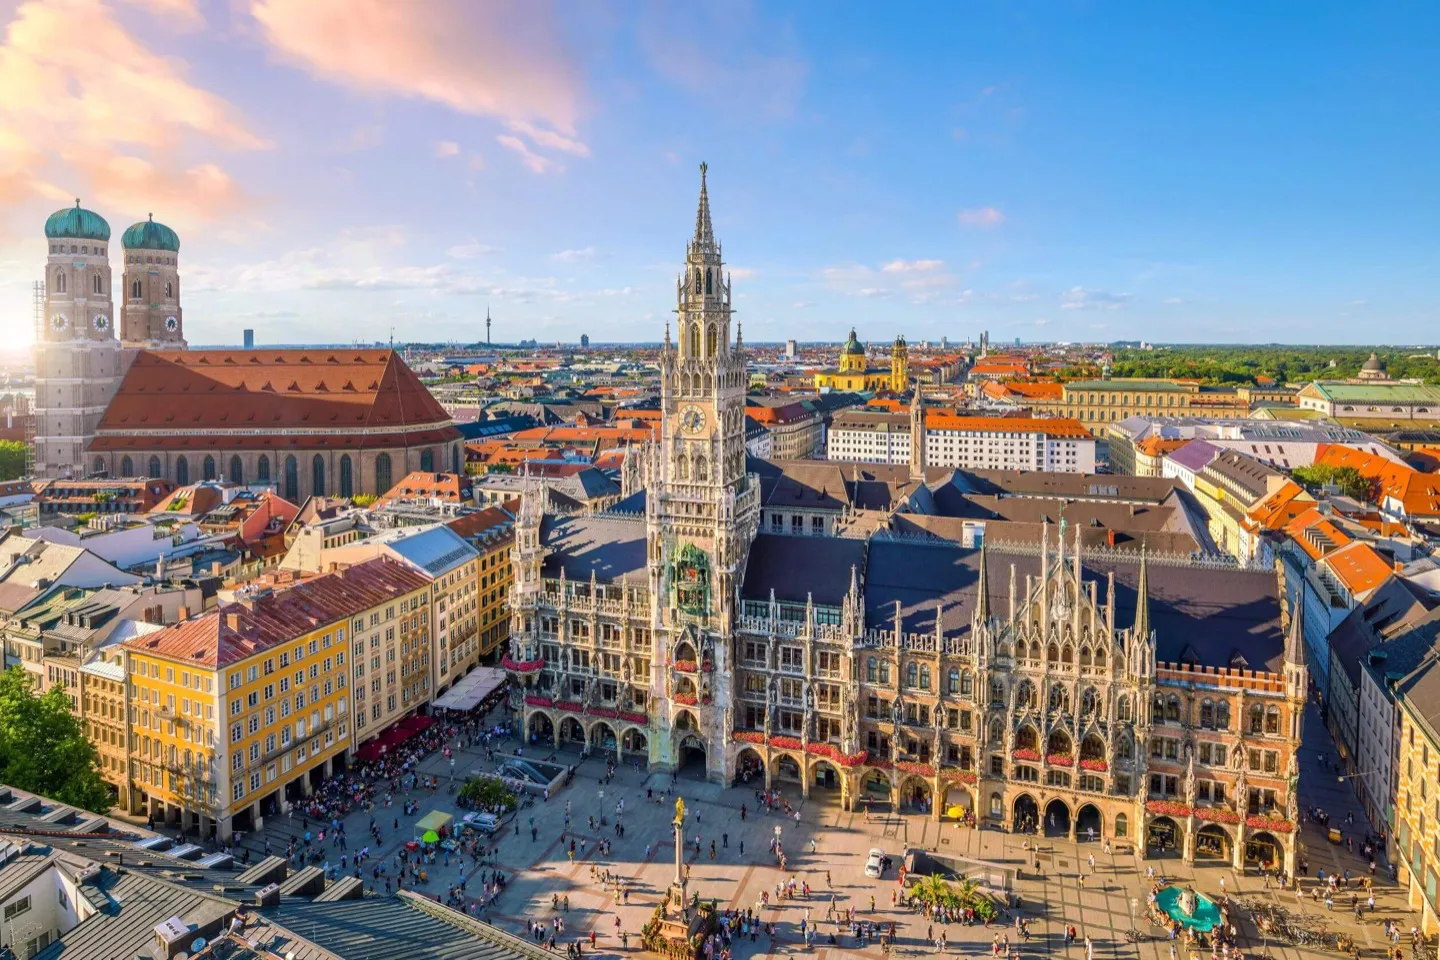 Experience Munich as well as Germany's Autobahn, Alps and Romantic Road in a supercar of your choice